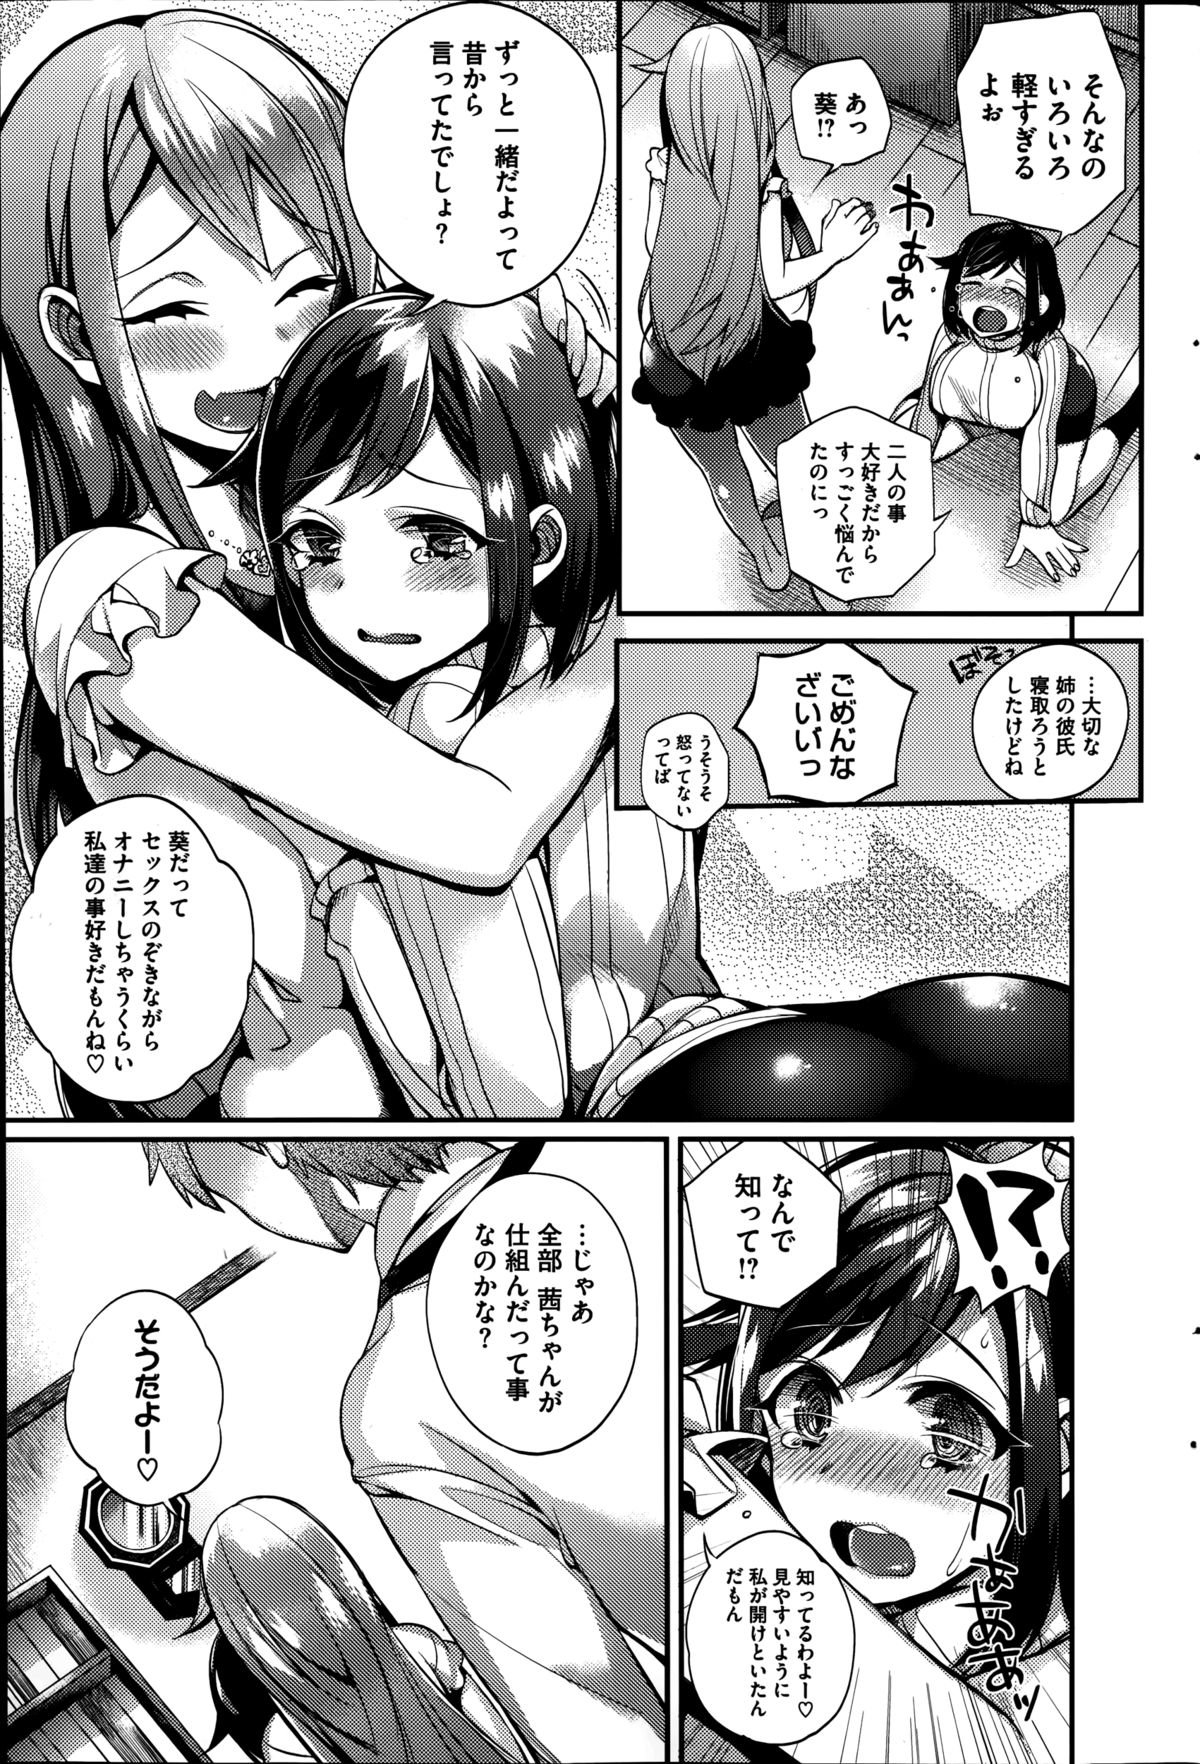 [Shindou] Sisters Conflict Ch.1-2 page 35 full